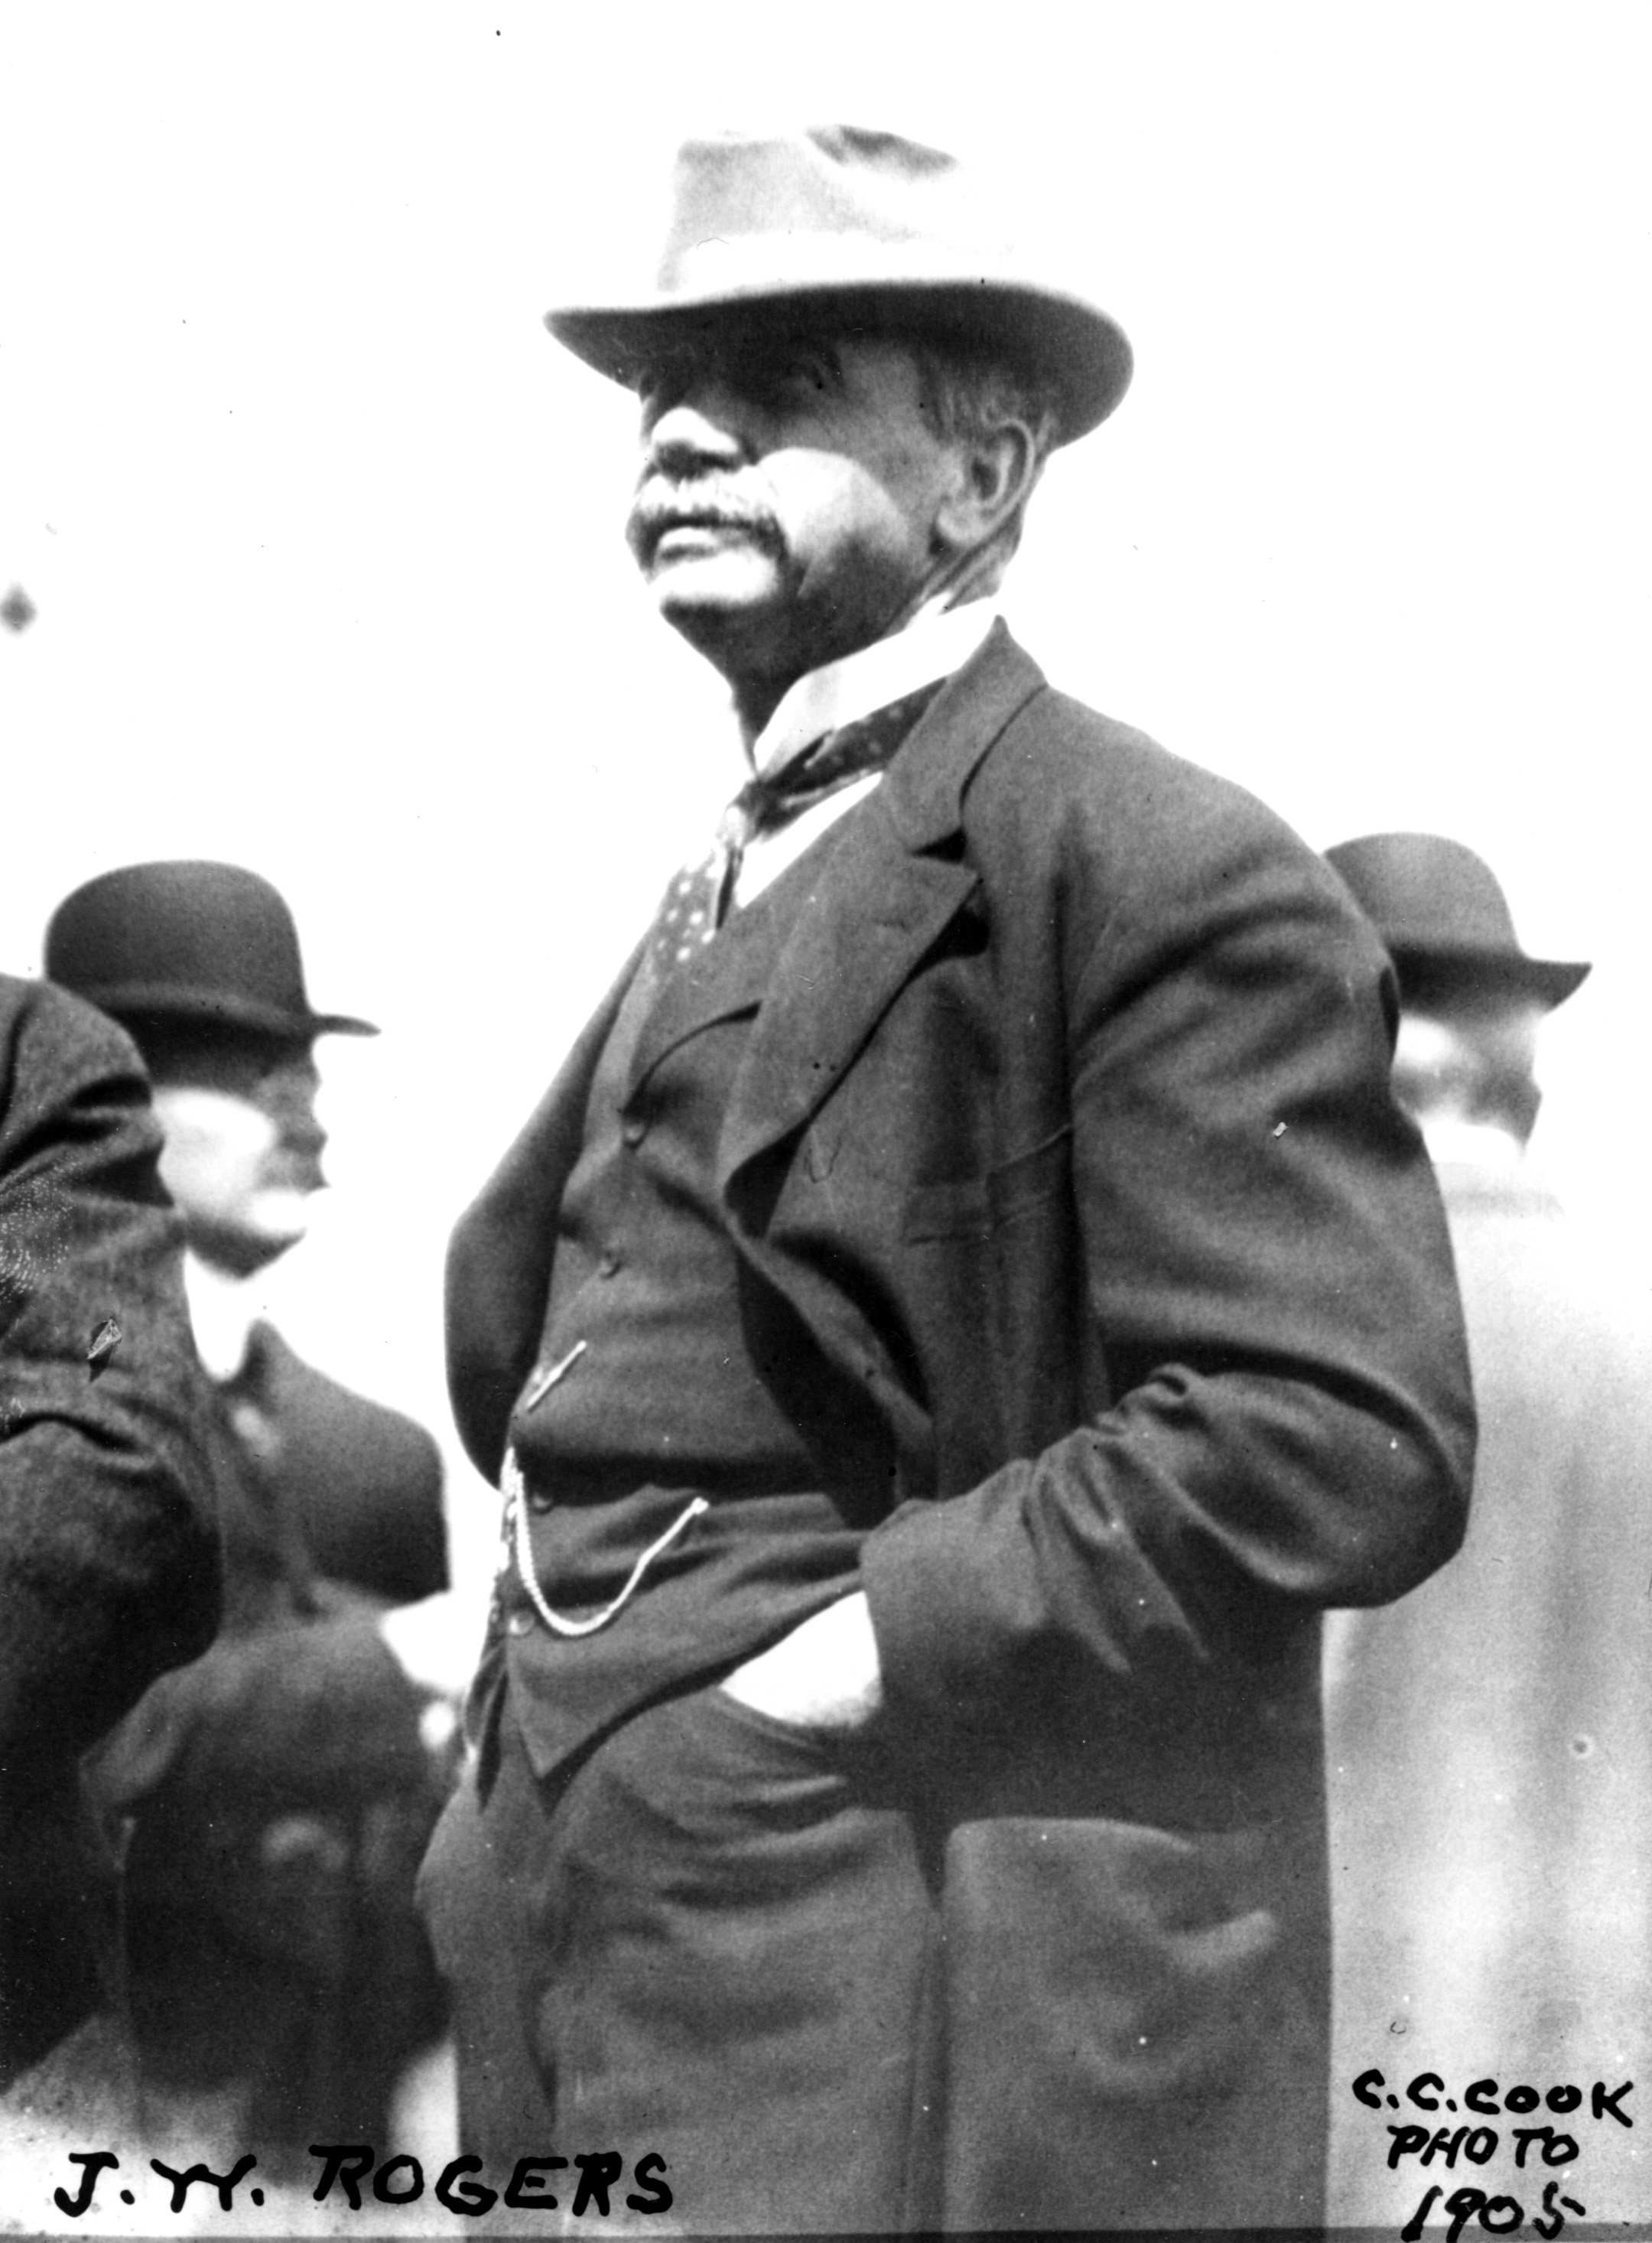 John W. Rogers in 1905 (C. C. Cook/Museum Collection)